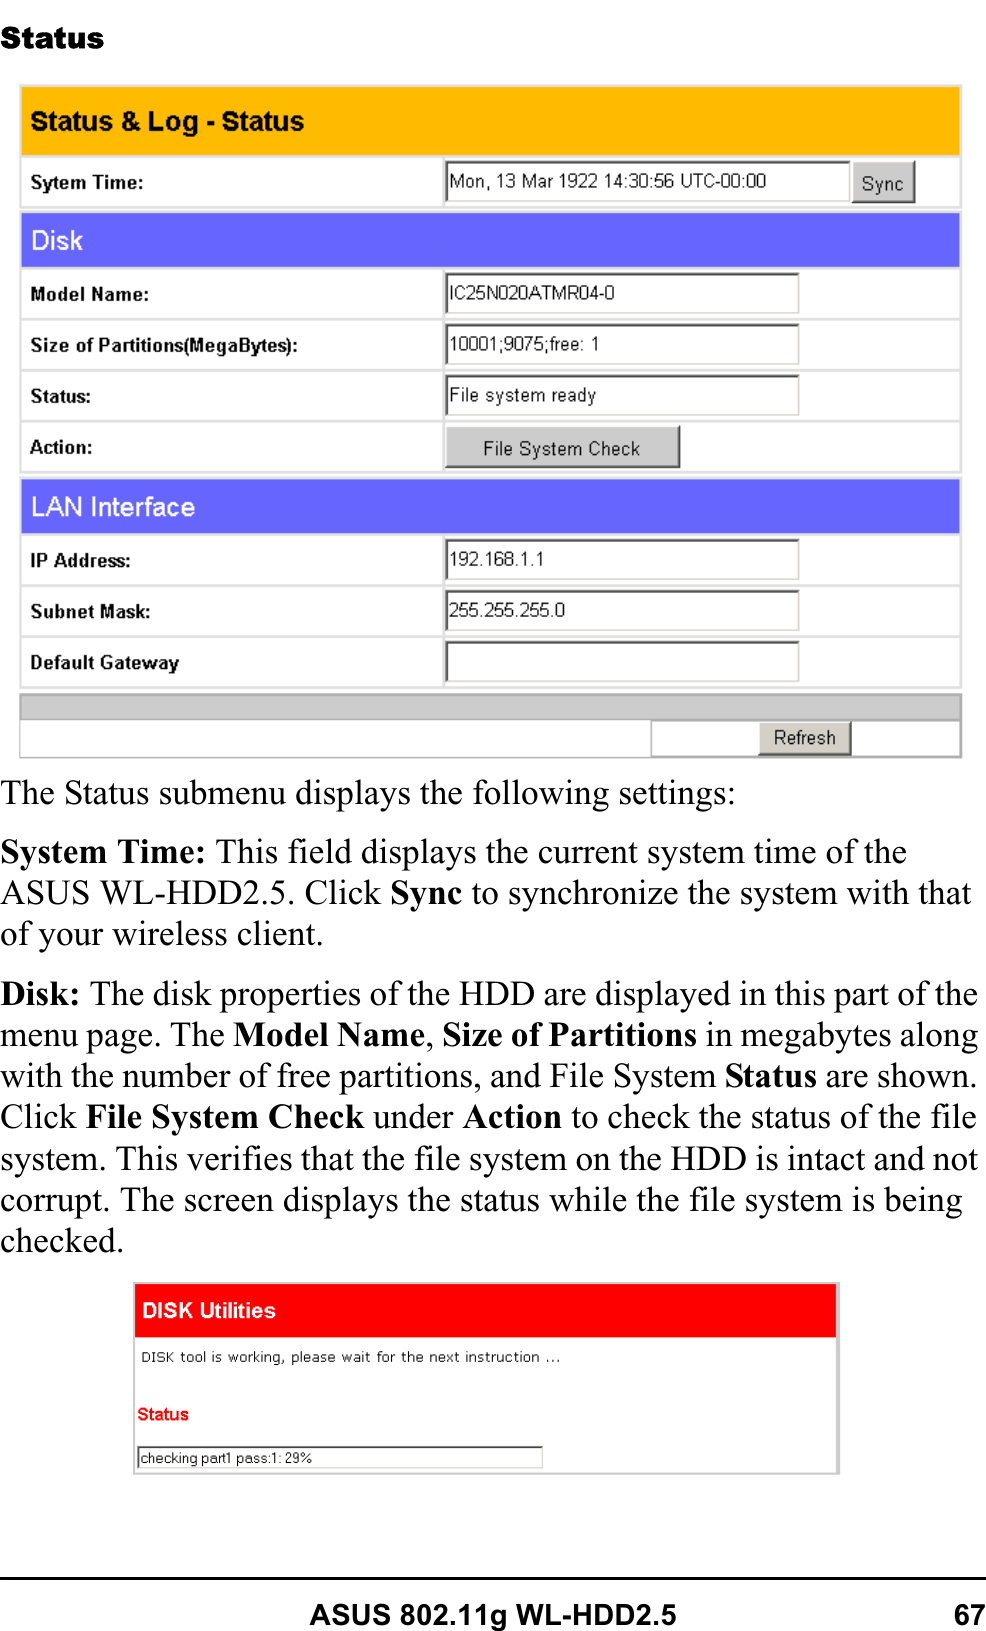 ASUS 802.11g WL-HDD2.5 67StatusThe Status submenu displays the following settings:System Time: This field displays the current system time of the ASUS WL-HDD2.5. Click Sync to synchronize the system with that of your wireless client.Disk: The disk properties of the HDD are displayed in this part of the menu page. The Model Name,Size of Partitions in megabytes along with the number of free partitions, and File System Status are shown. Click File System Check under Action to check the status of the file system. This verifies that the file system on the HDD is intact and not corrupt. The screen displays the status while the file system is being checked.